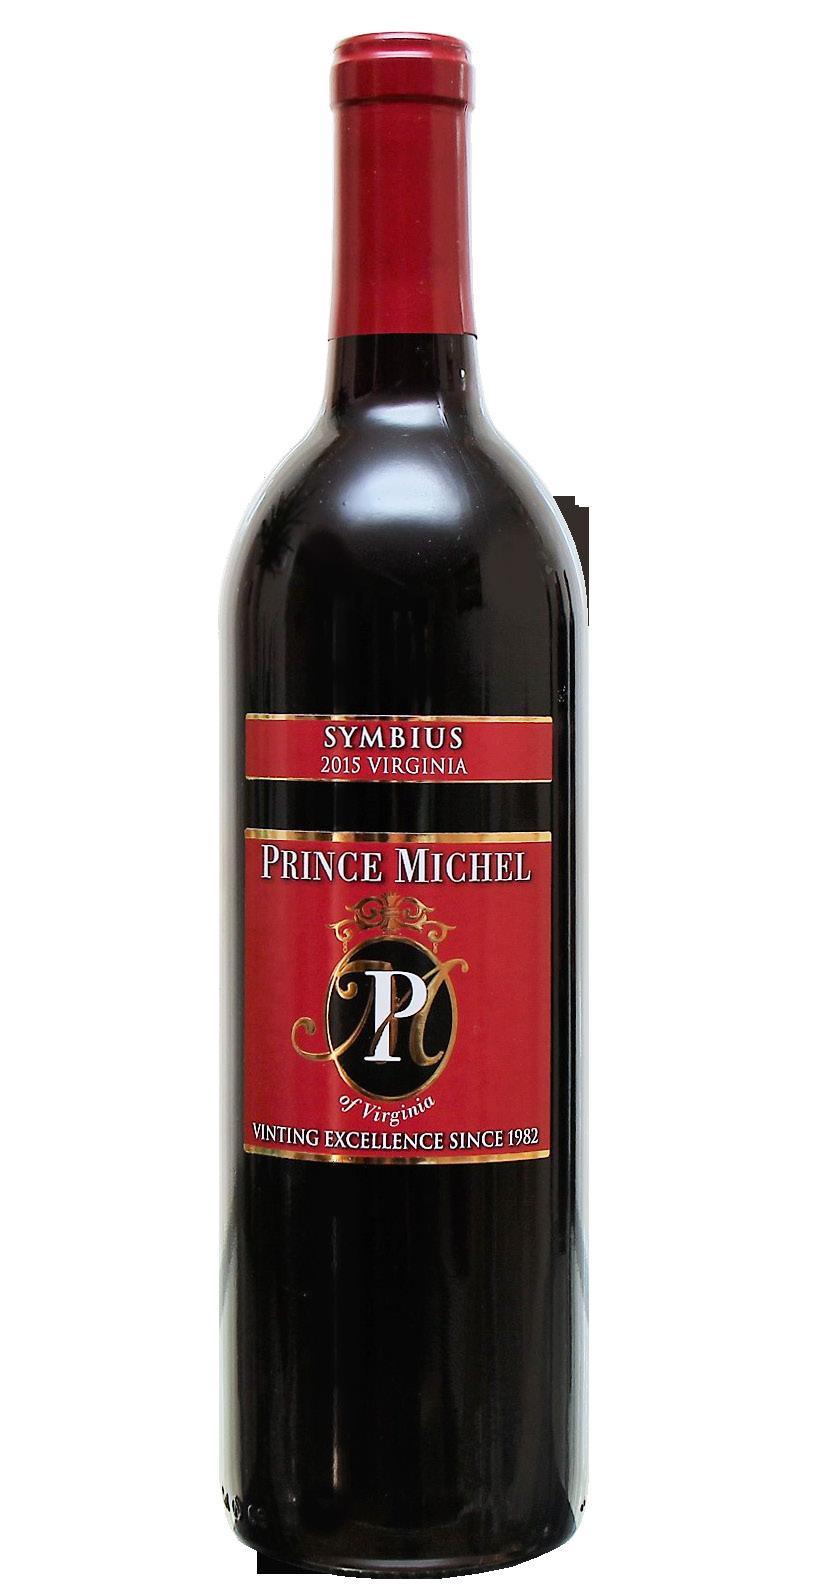 2015 Symbius Vineyard: Prince Michel Grand Award: Virginia Governor s Cup Award 2018 Wine Notes Prince Michel s Symbius is a high-quality wine, made by the recipe from Bordeaux, France.